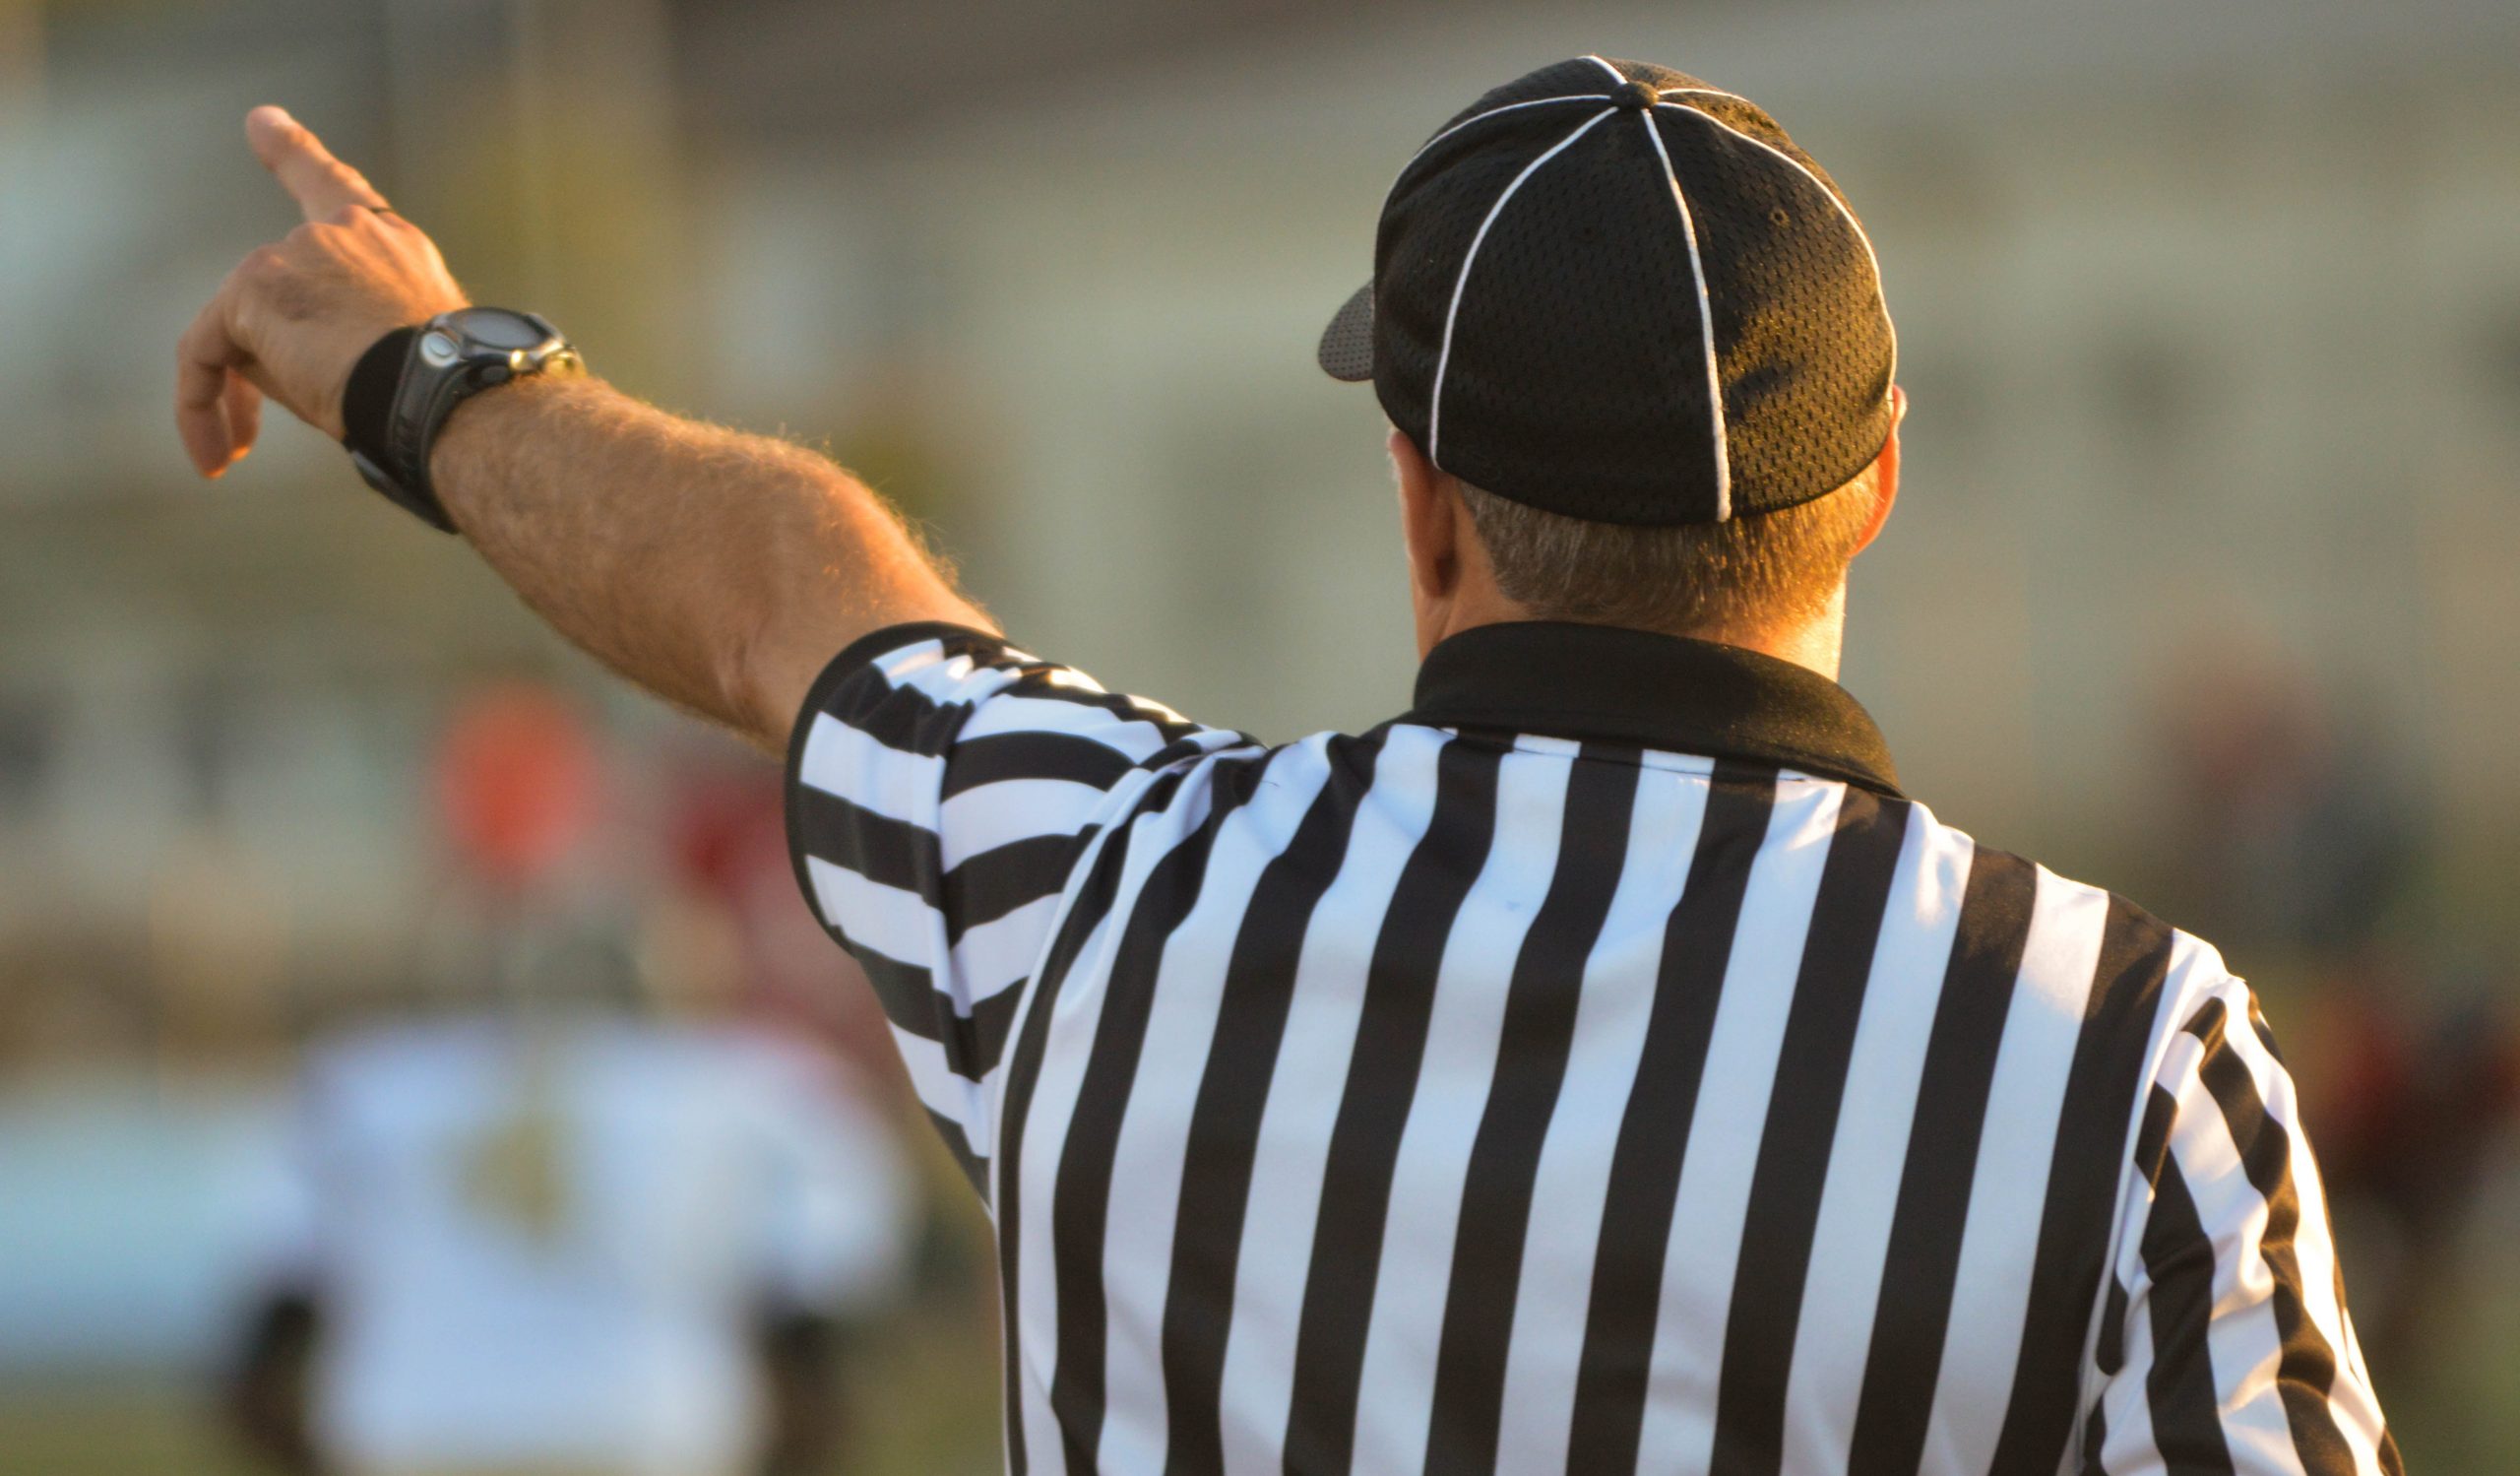 Photograph of a referee with his back facing the camera. He's wearing a black and white striped shirt, a black hat, and a watch. He's pointing to something off camera.